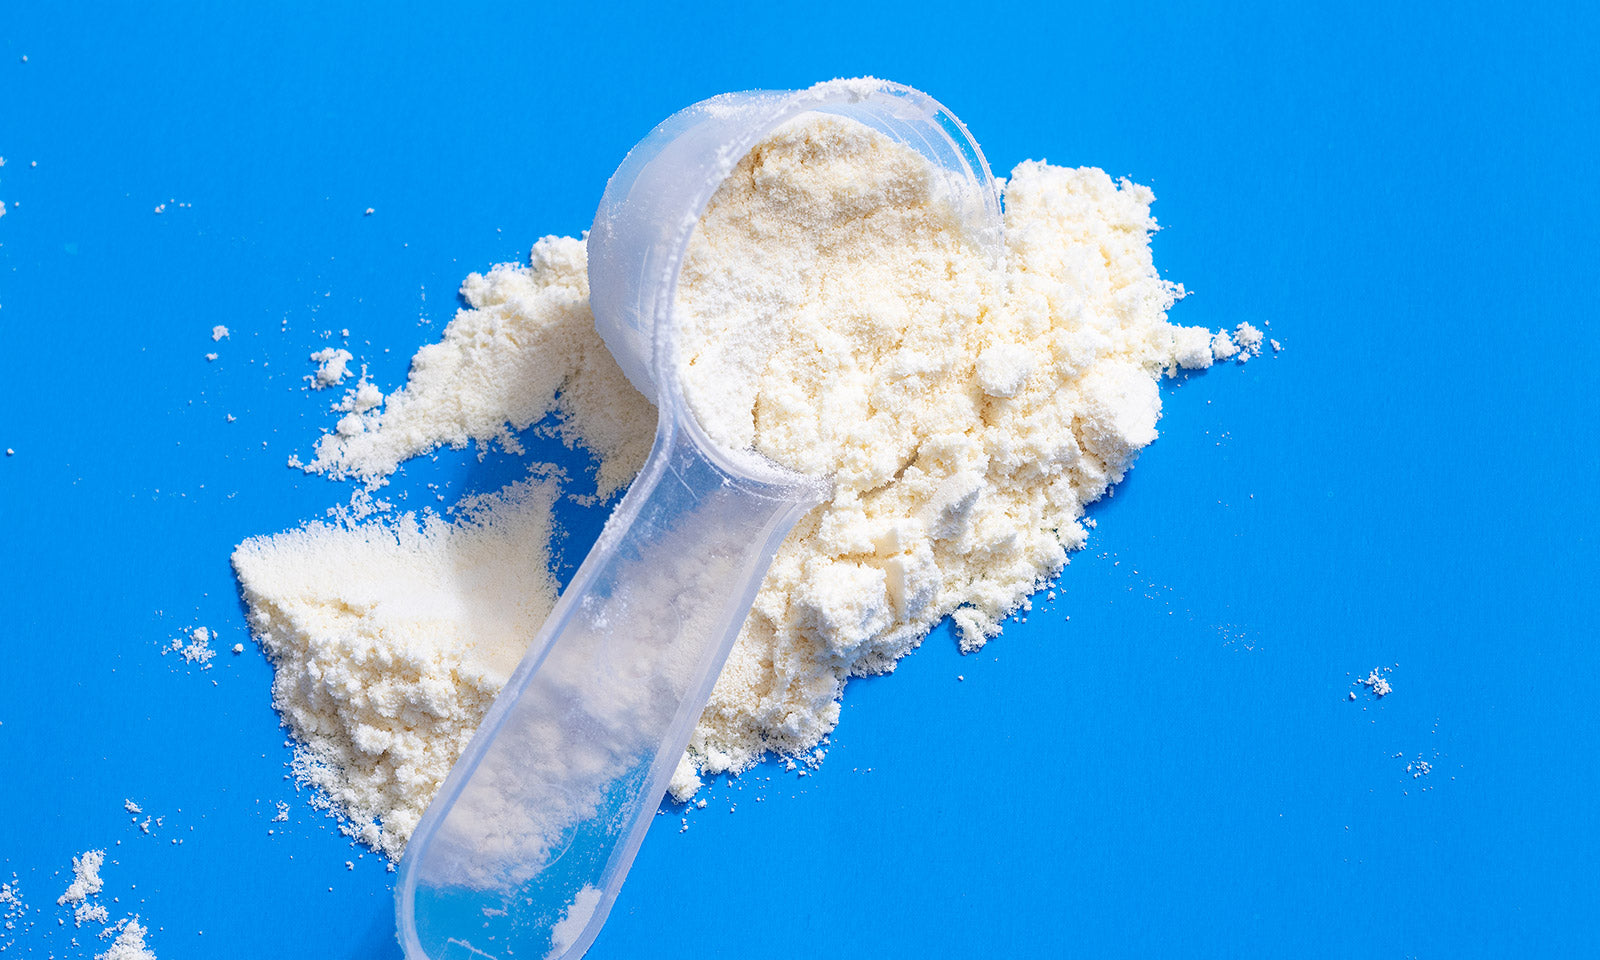 Reasons why your creatine supplements may not be working for you